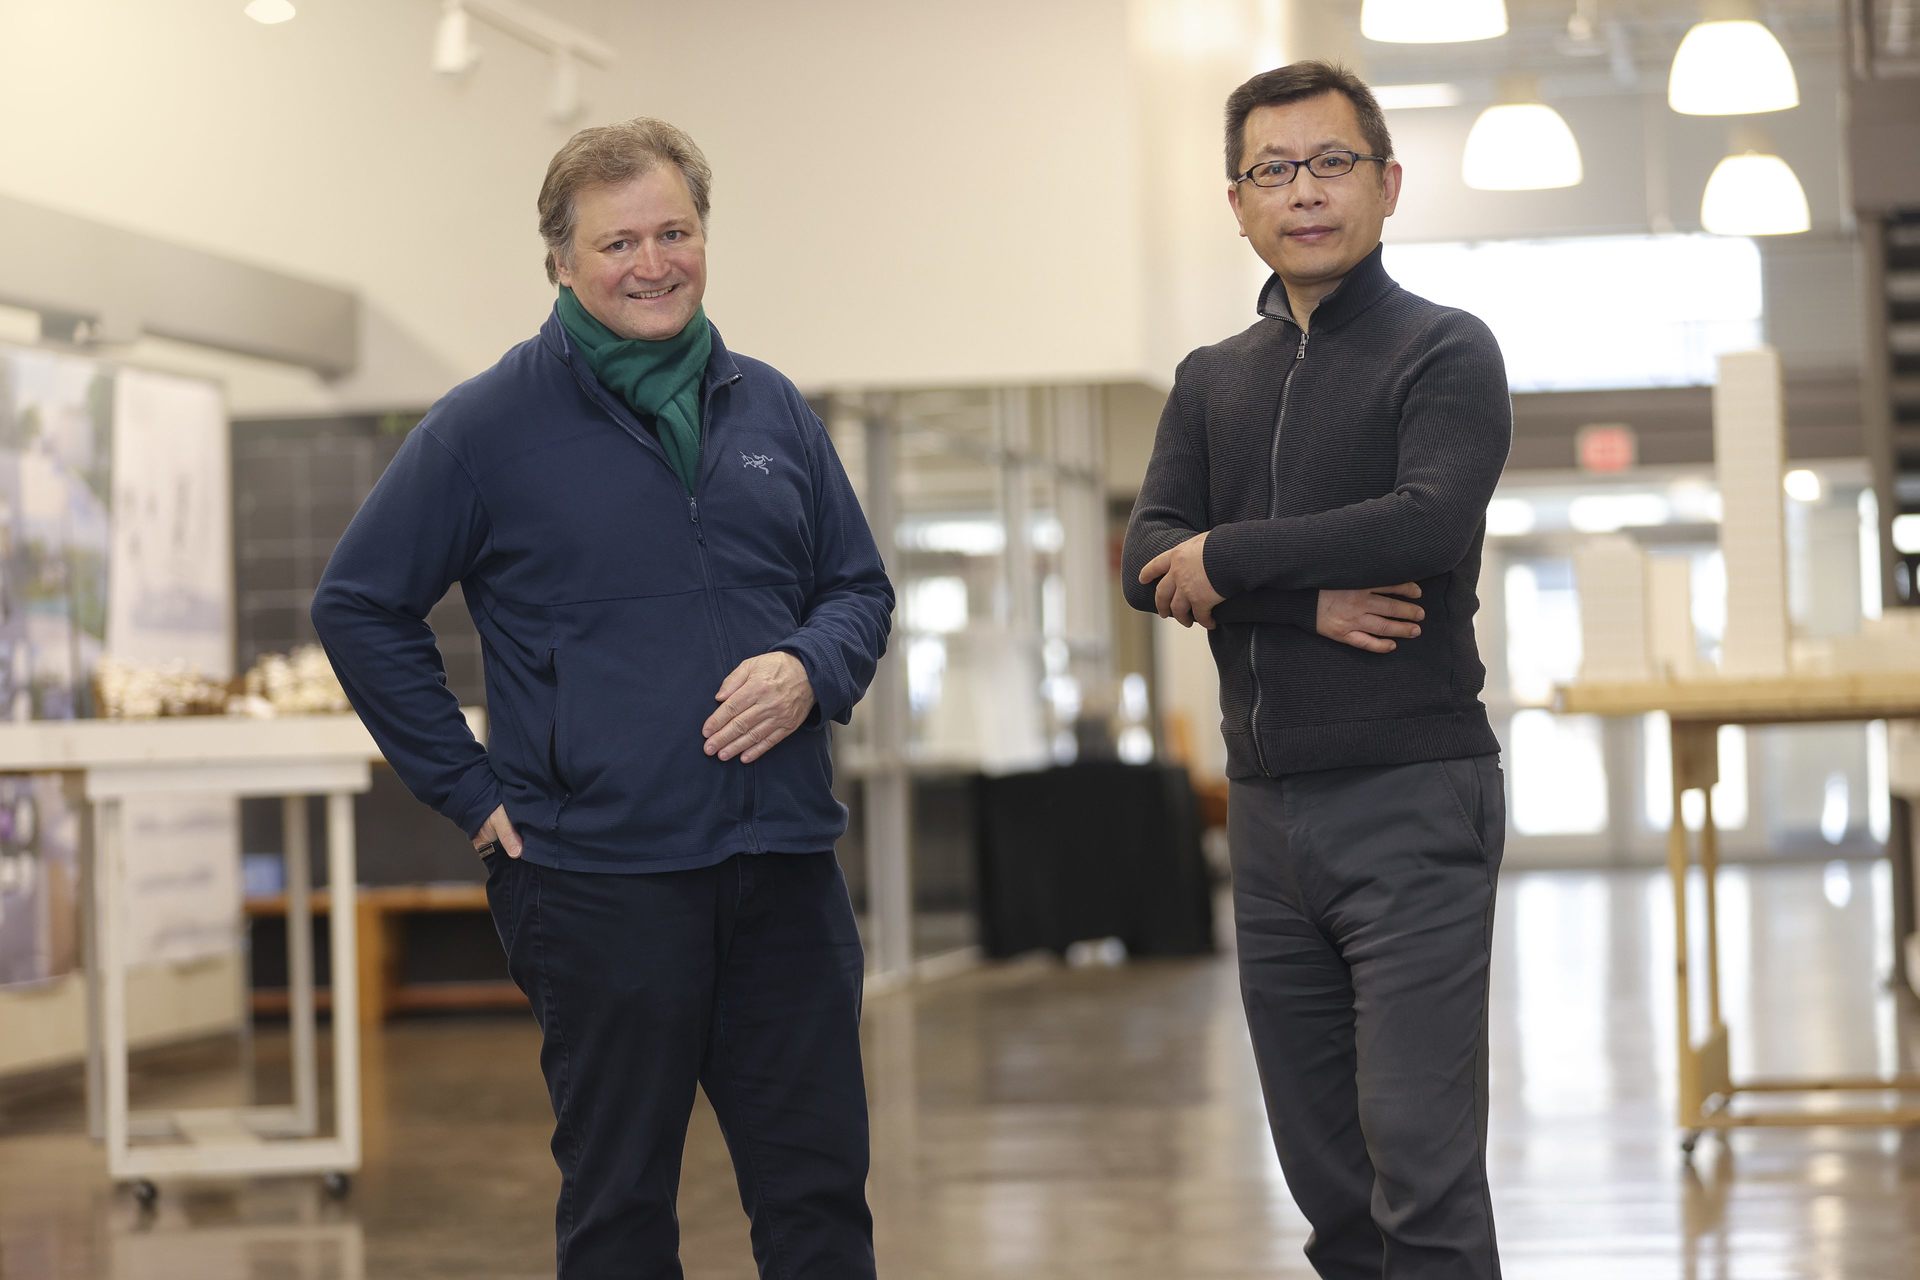 Huang and Luescher standing next to each other